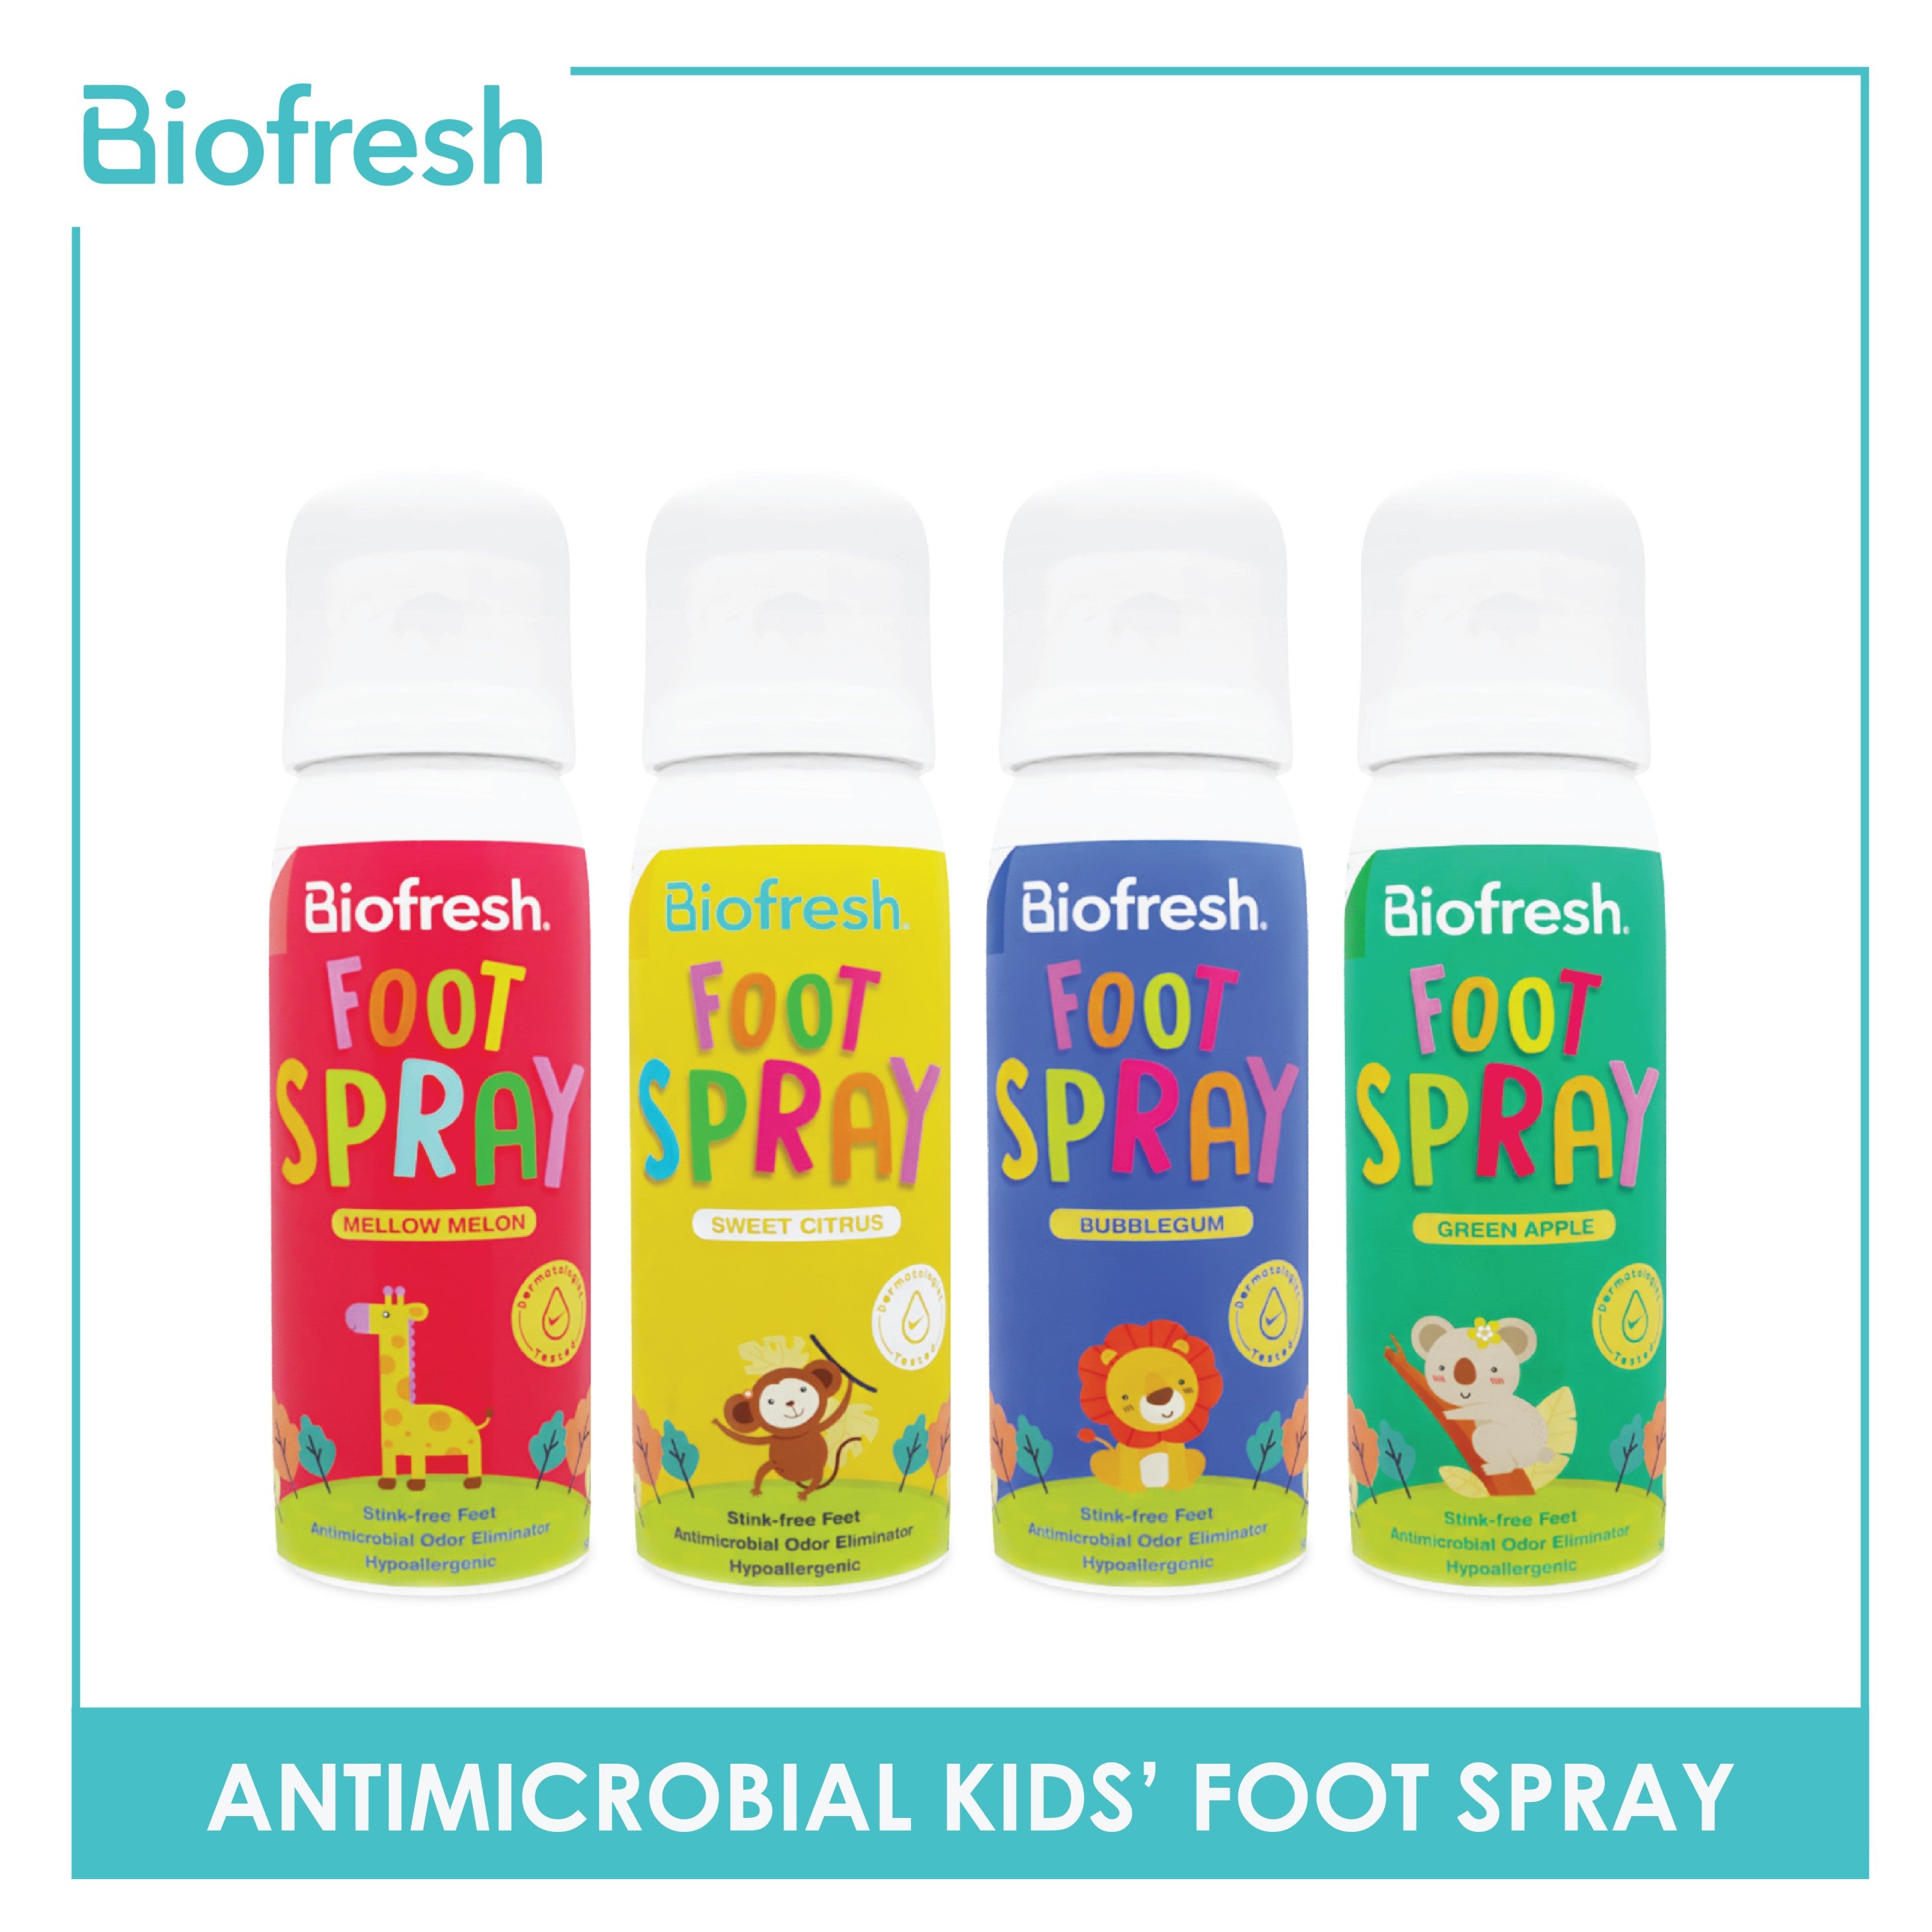 Antimicrobial Foot Spray for Kids